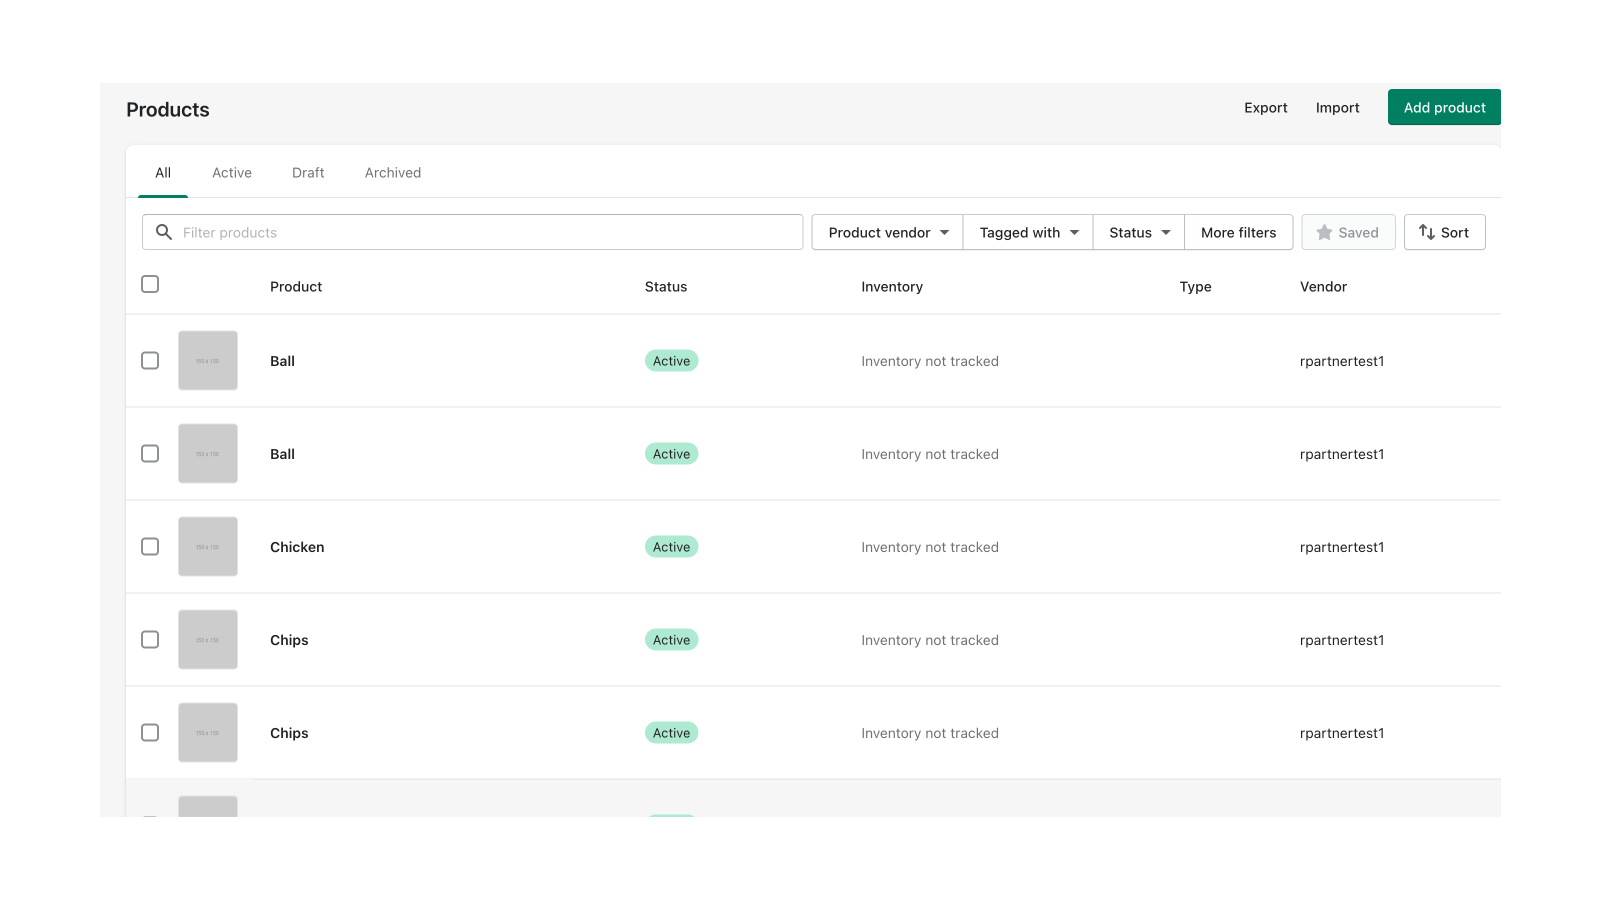 View the data in your admin panel